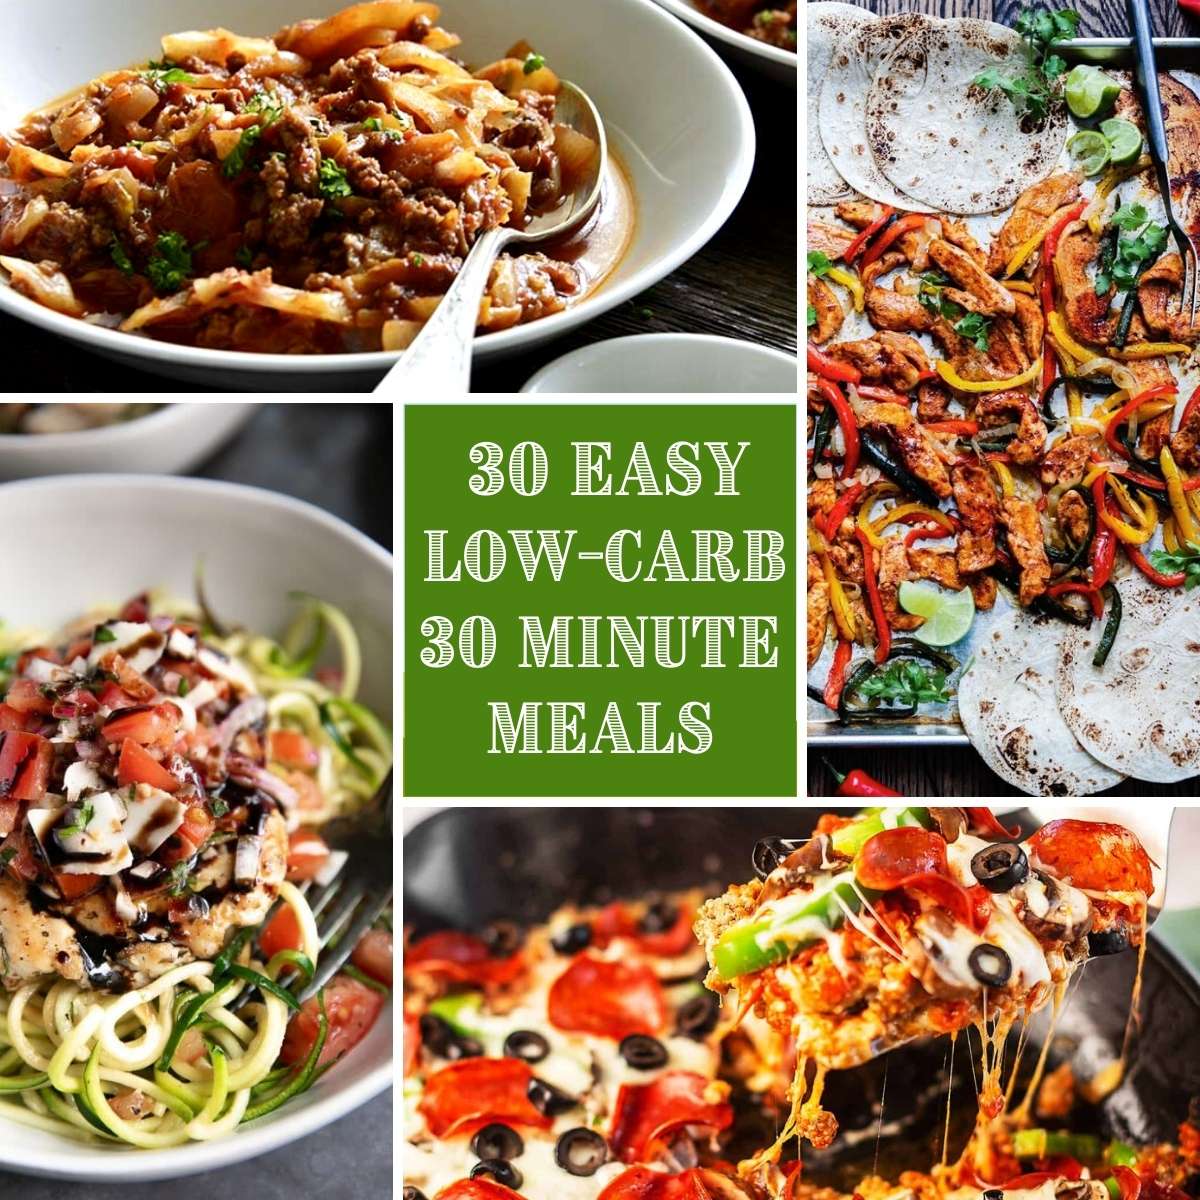 30 Easy 30 Minute Low-Carb Meals - Amee's Savory Dish